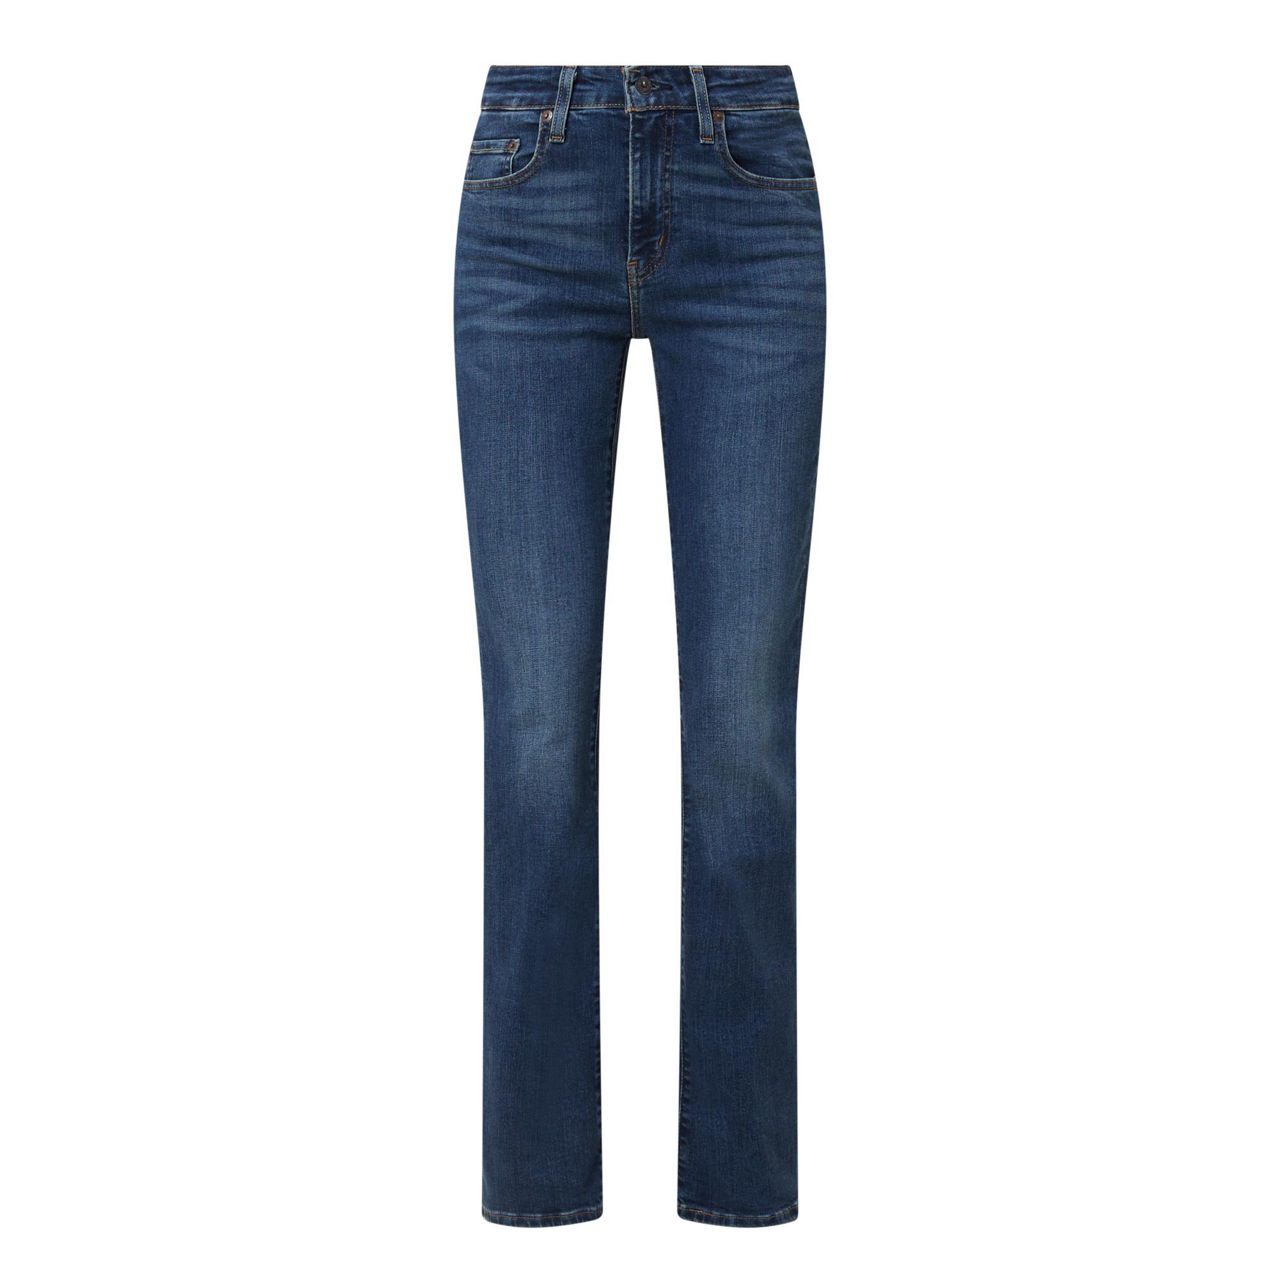 Levi's Original Red Tab Women's 725 High Rise Bootcut Jeans